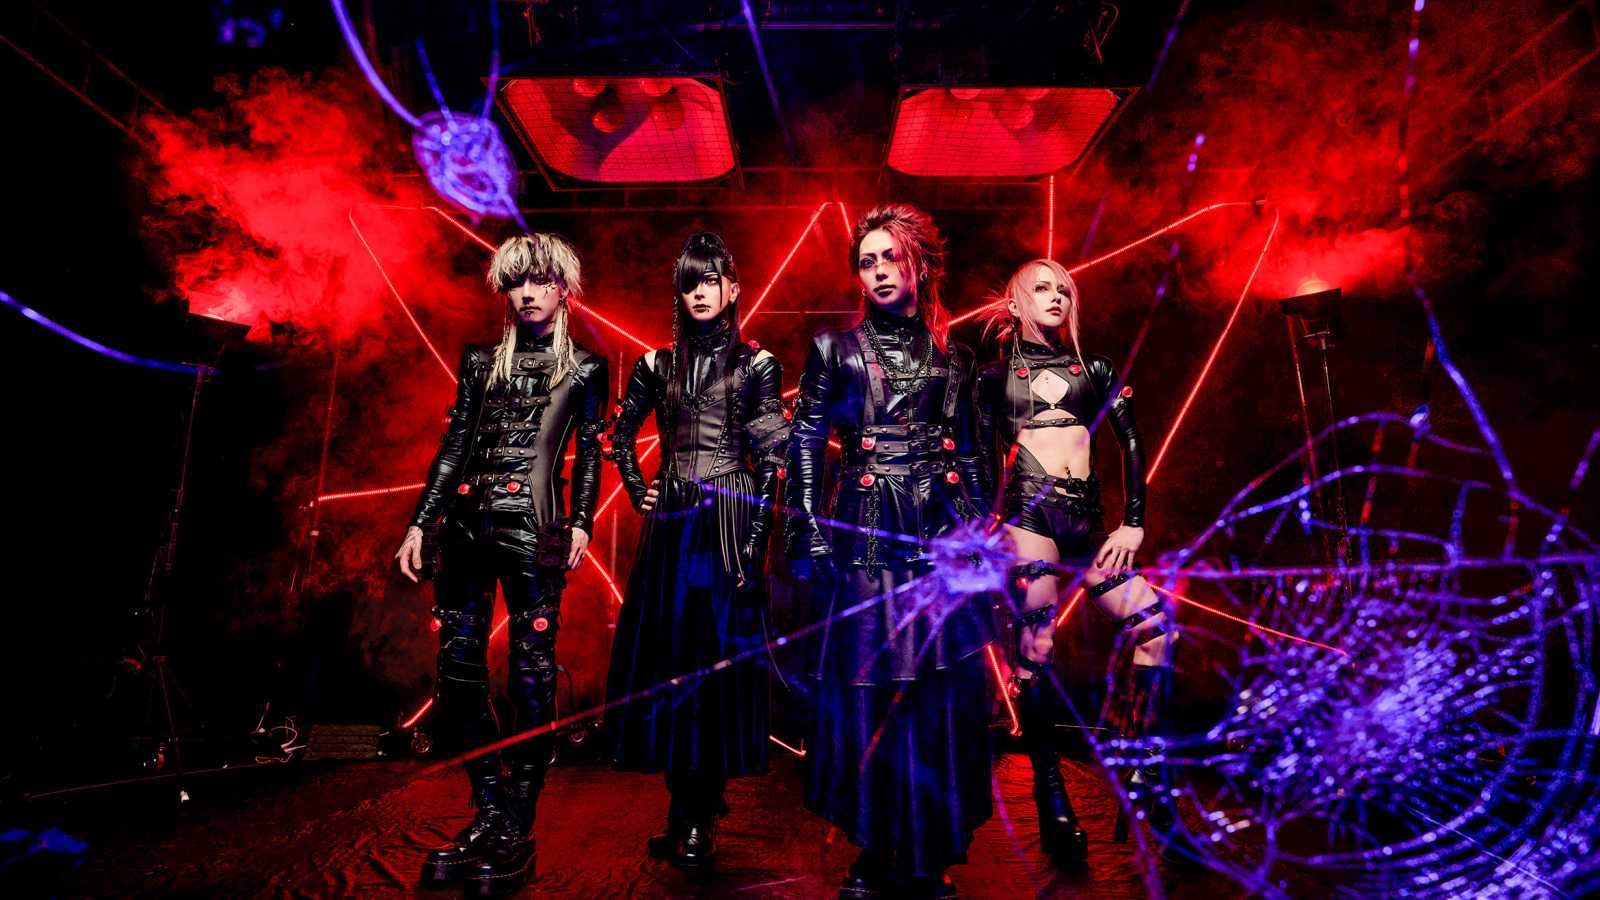 JILUKA to Return to Europe © DPR JAPAN. All rights reserved.